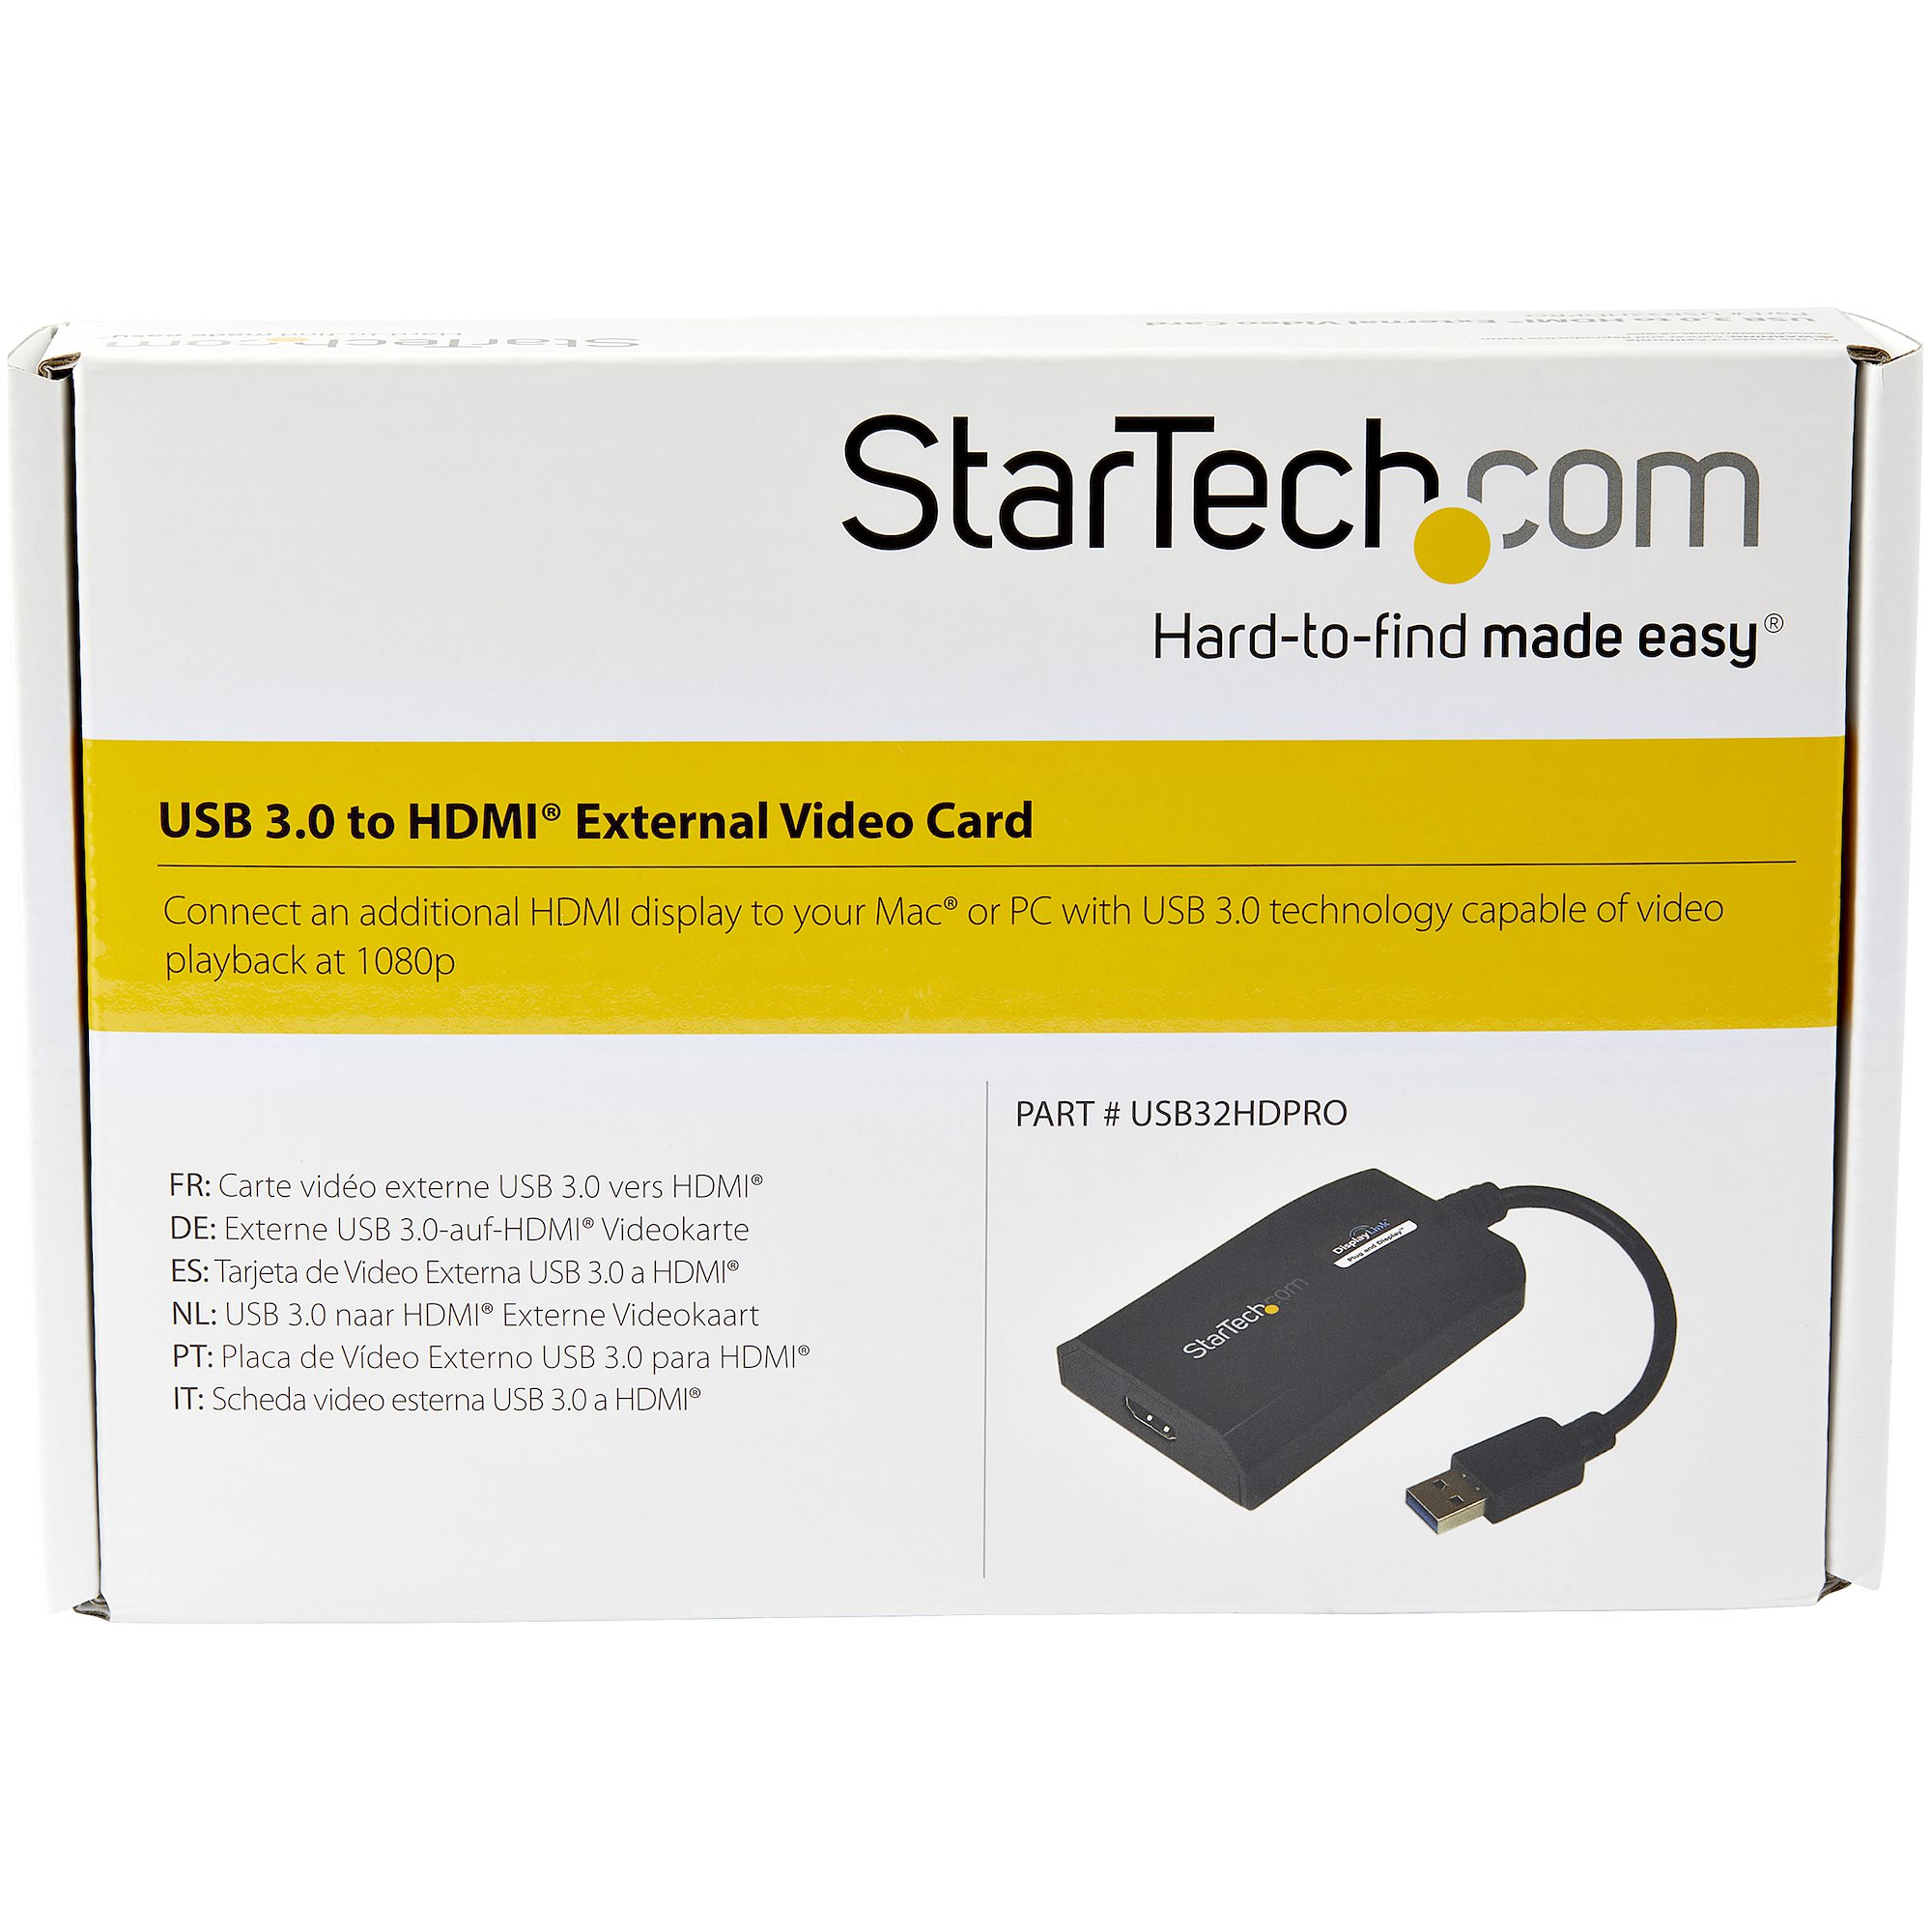 StarTech.com USB 3.0 to HDMI Adapter - DisplayLink Certified - 1080p (1920x1200) - USB Type-A to HDMI Display Adapter Converter for Monitor - External Video & Graphics Card - Windows/Mac